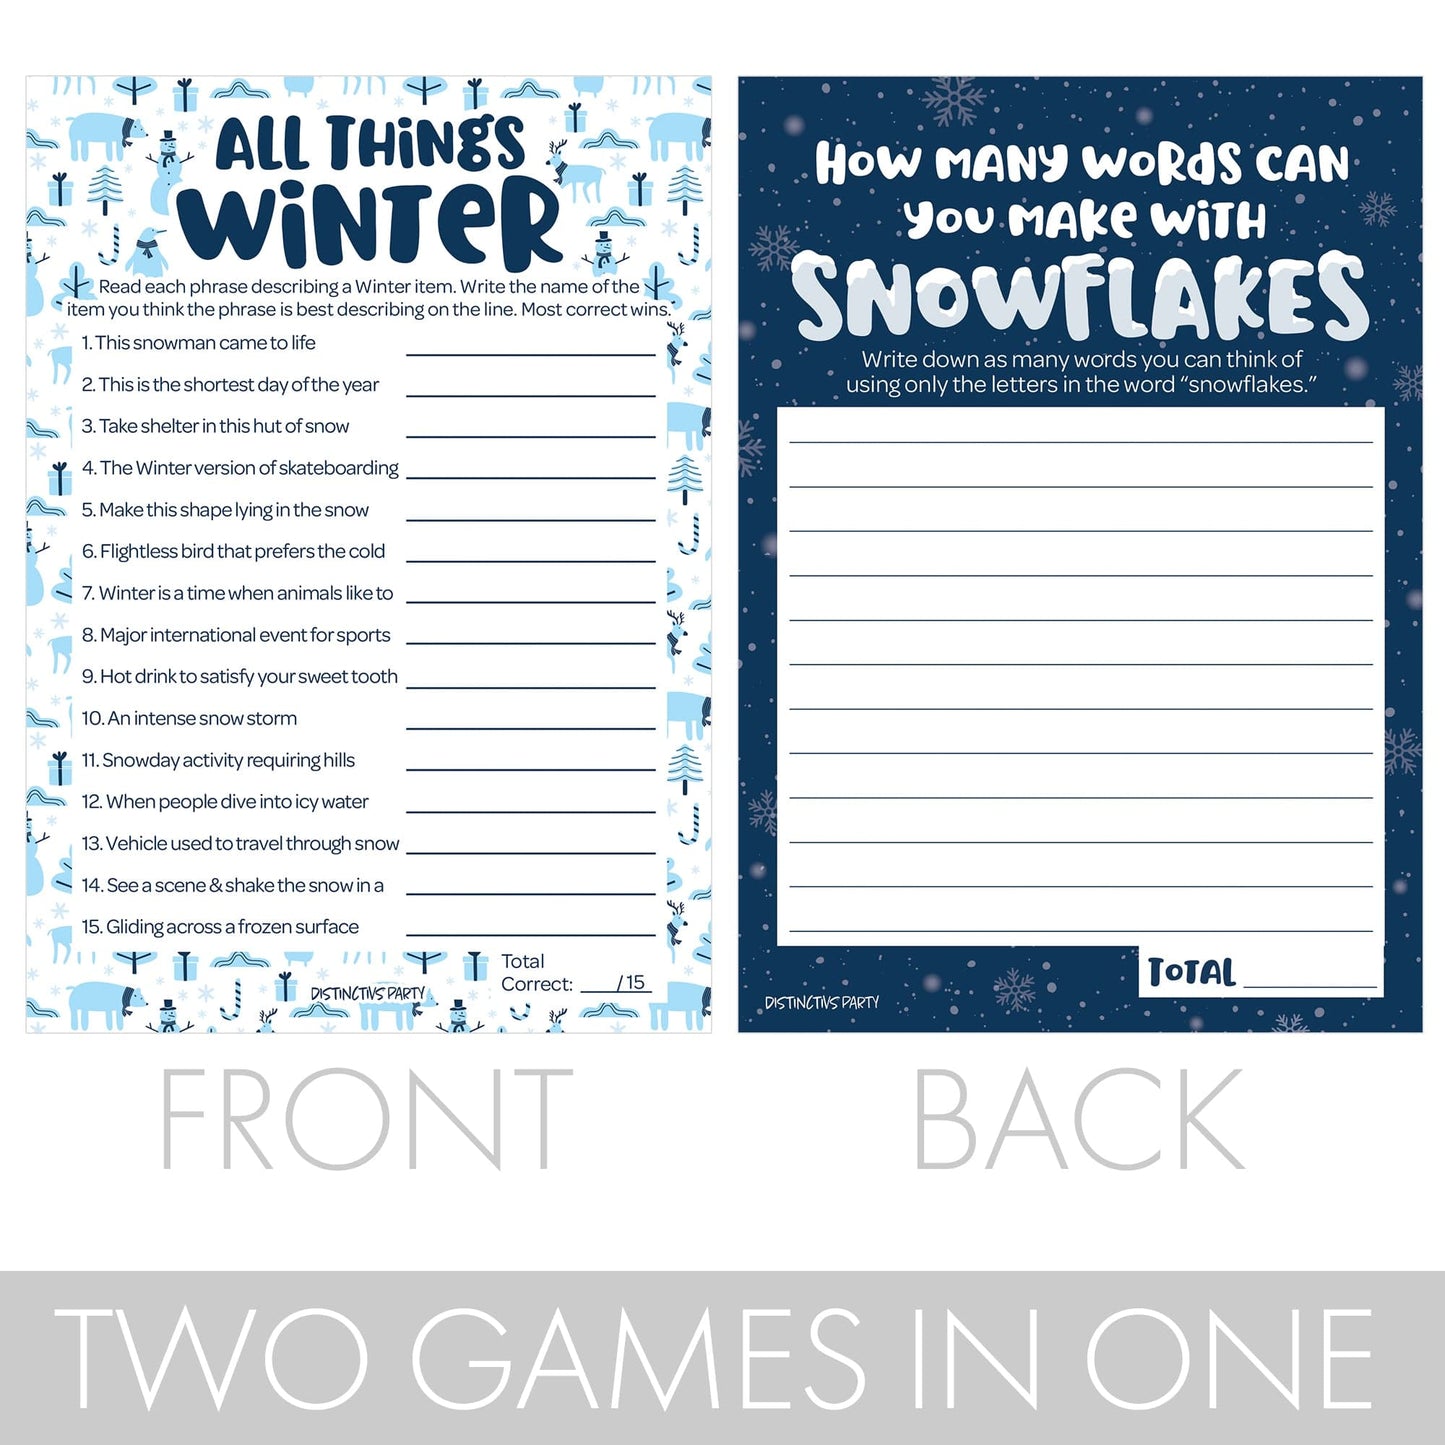 Winter Holiday Party Games Bundle - All Things Winter Guessing Game and Snowflake Anagram Word Game - 25 Dual-Sided Cards